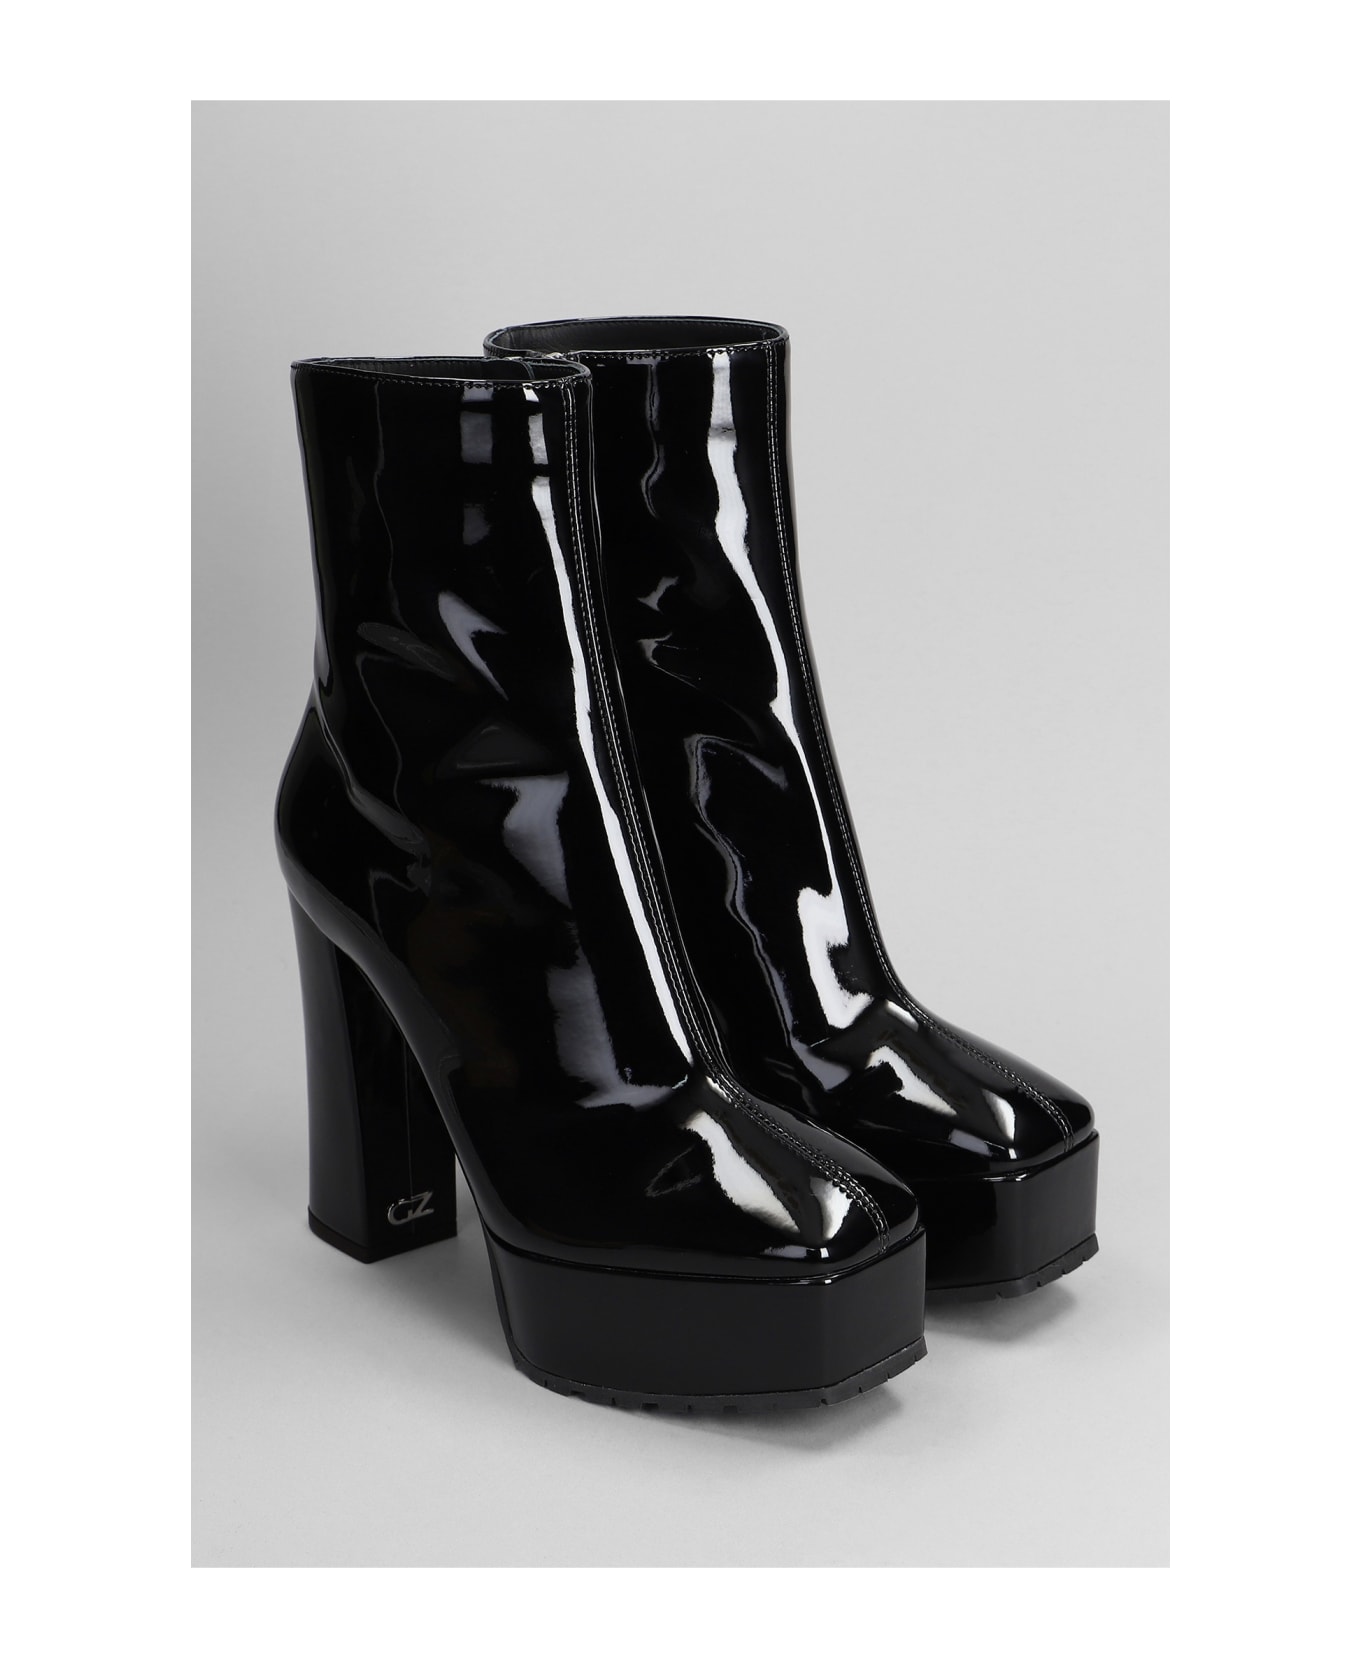 Giuseppe Zanotti Morgana High Heels Ankle Boots In Black Patent Leather - black ブーツ